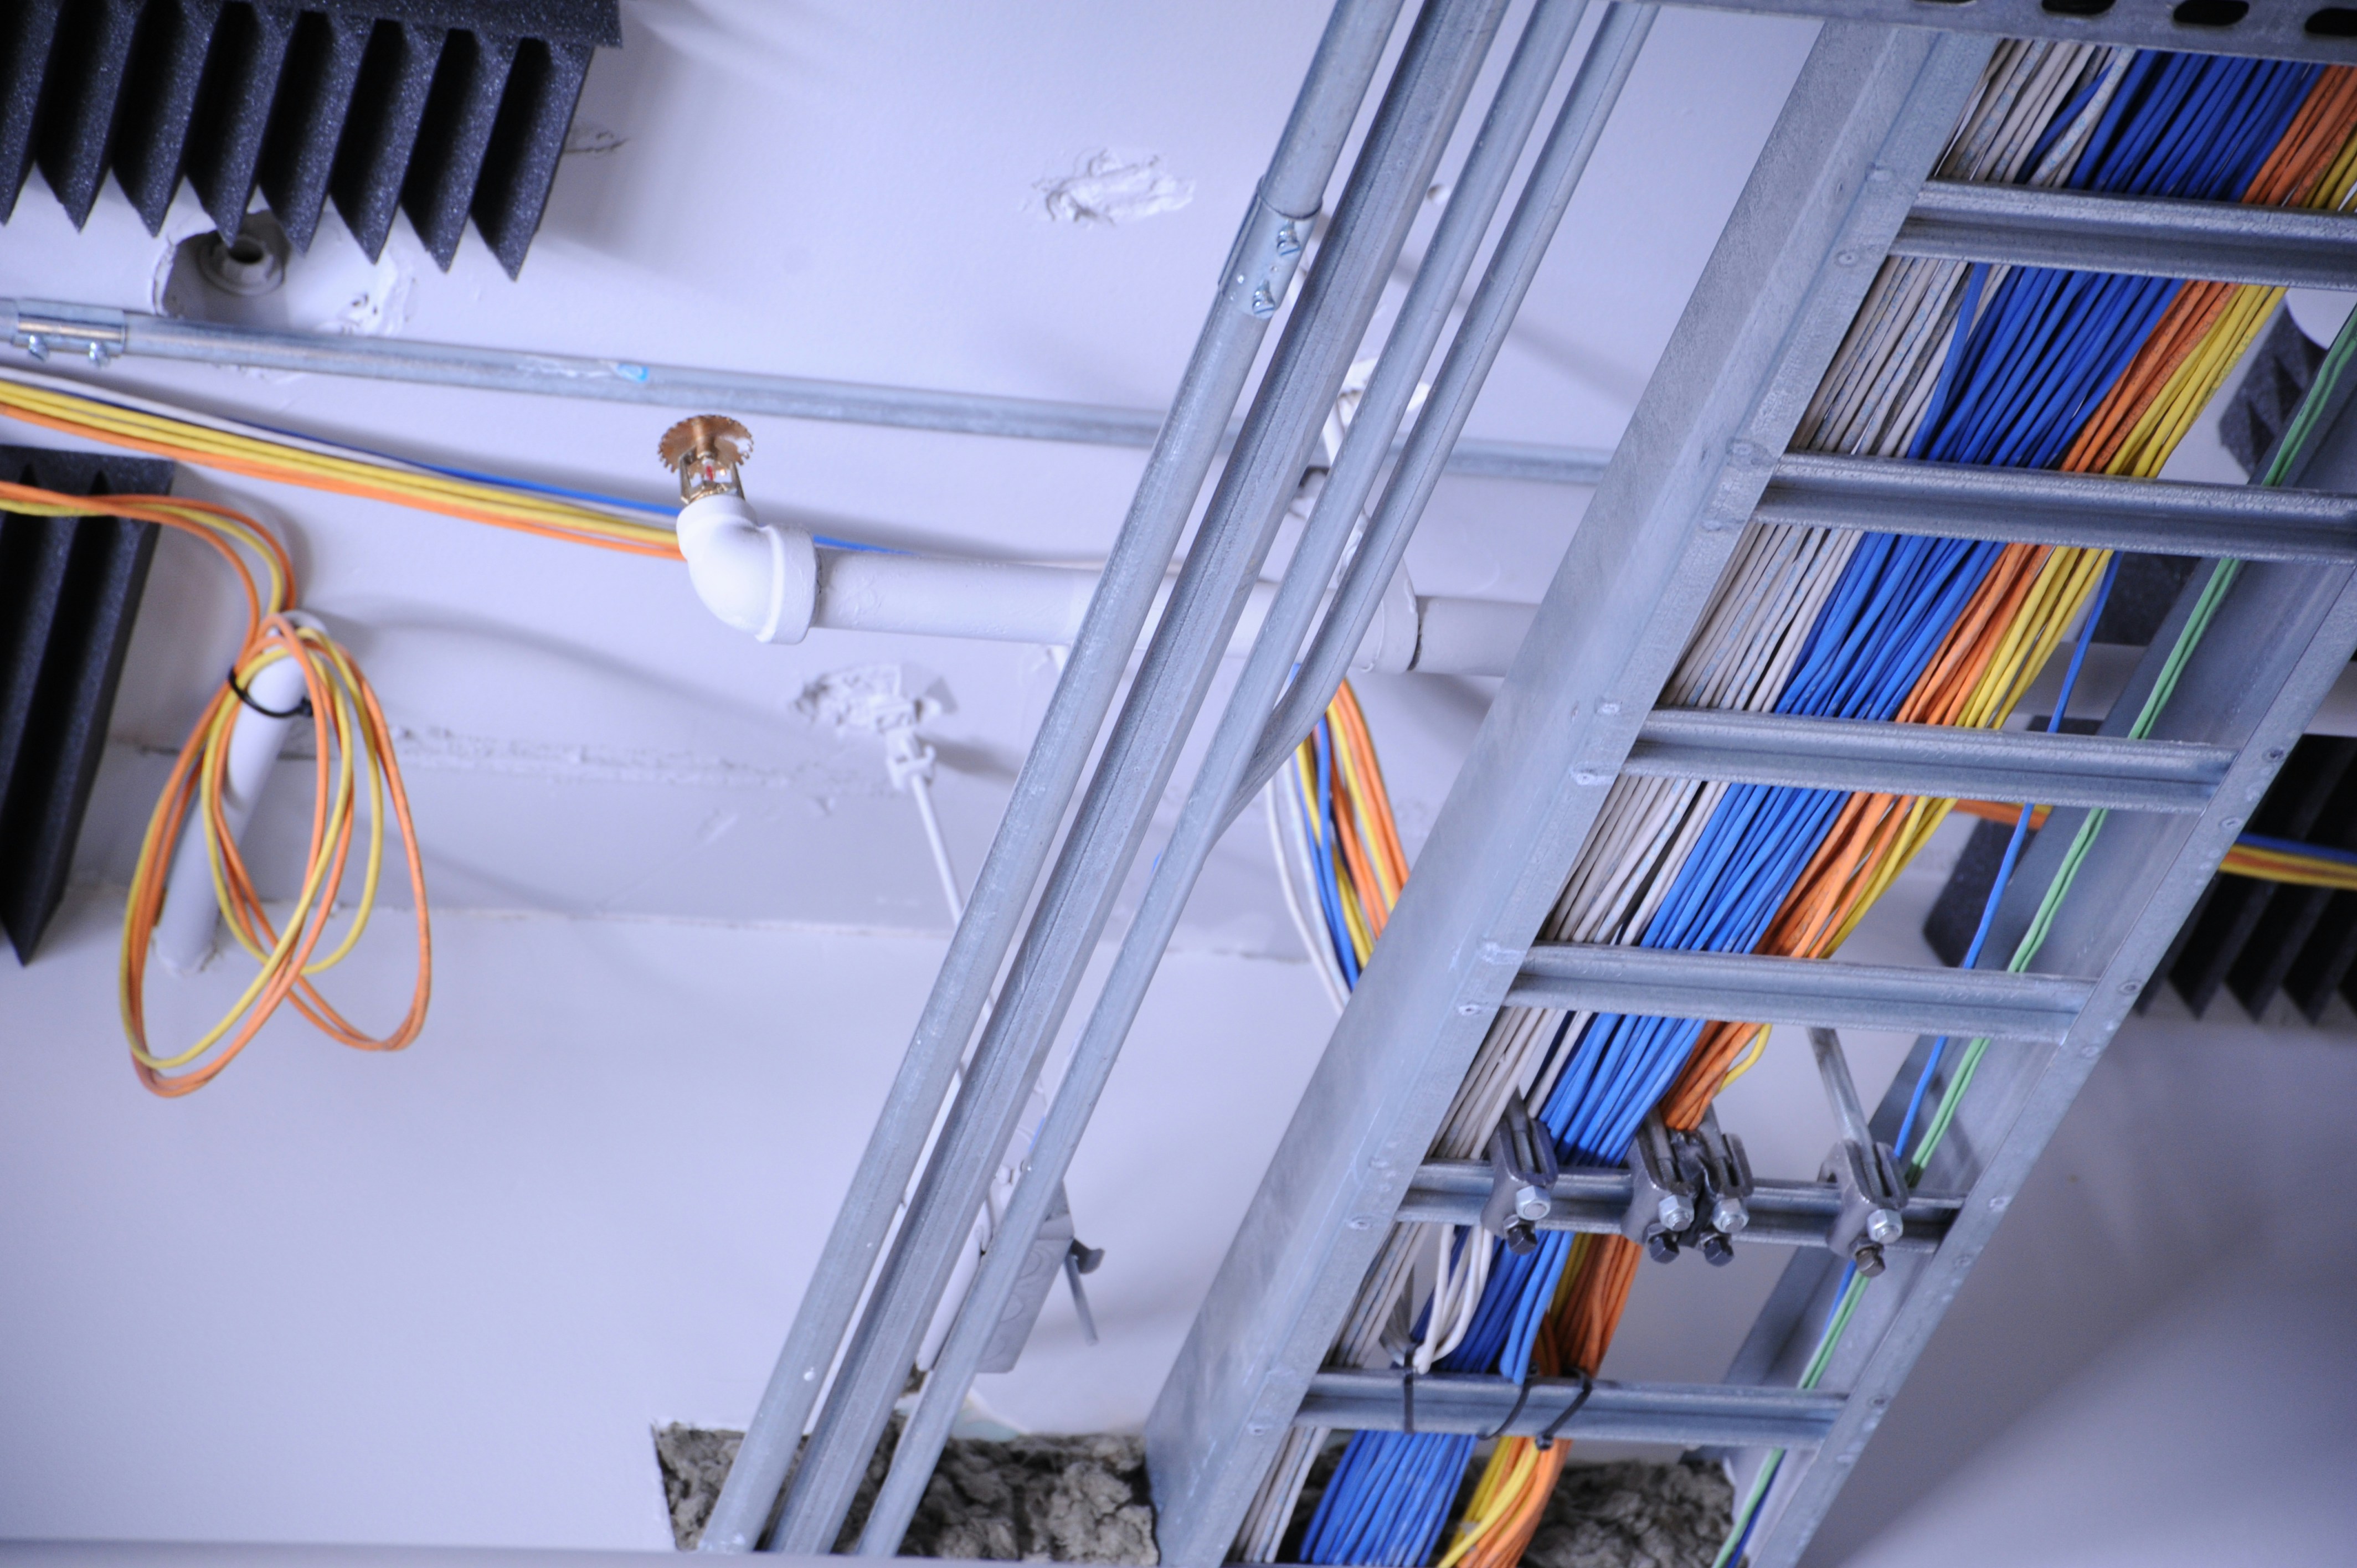 Organized wiring and cabling running along a ceiling and rafters